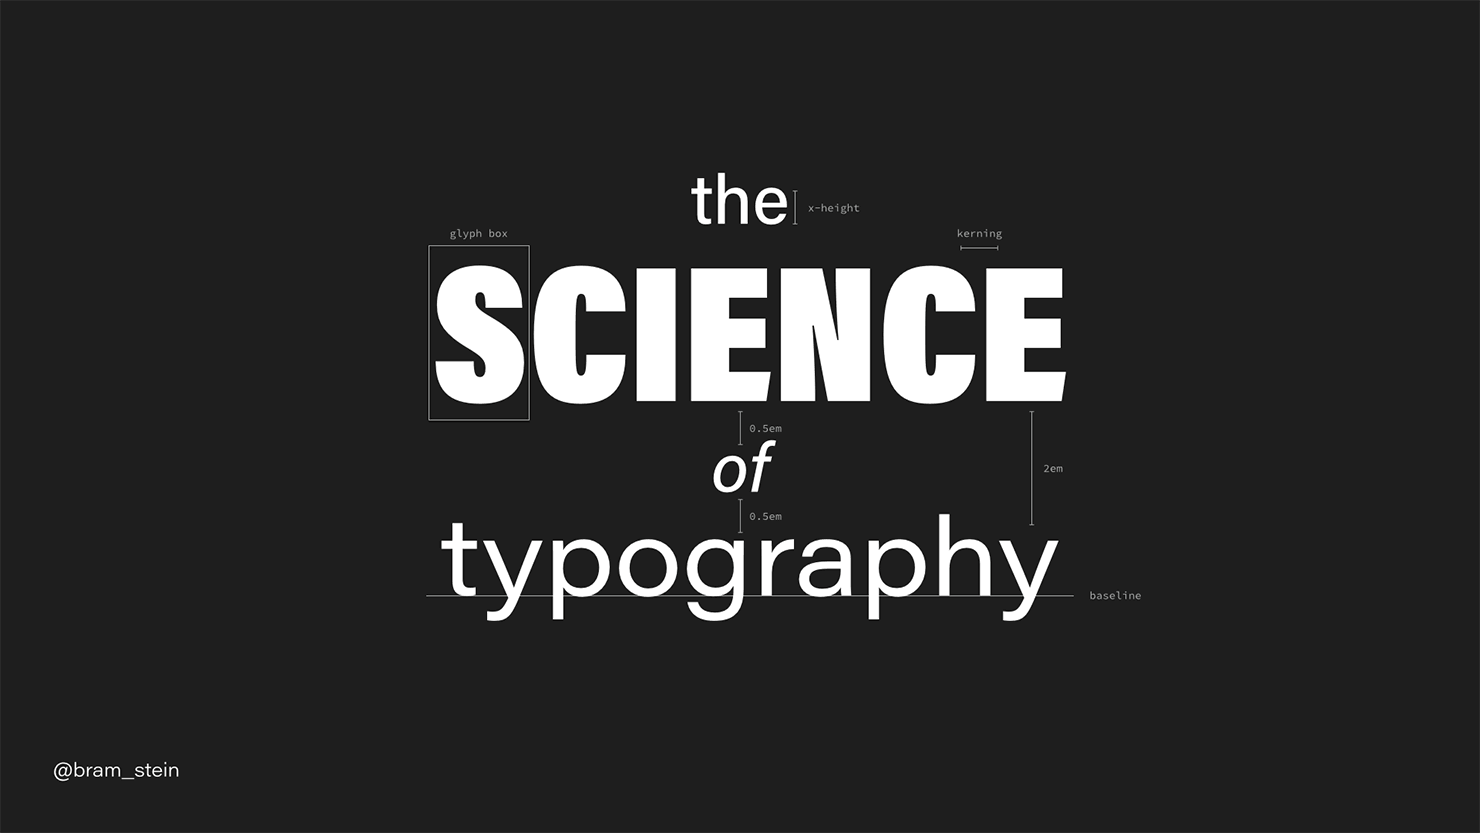 The Science of Typography opening slide